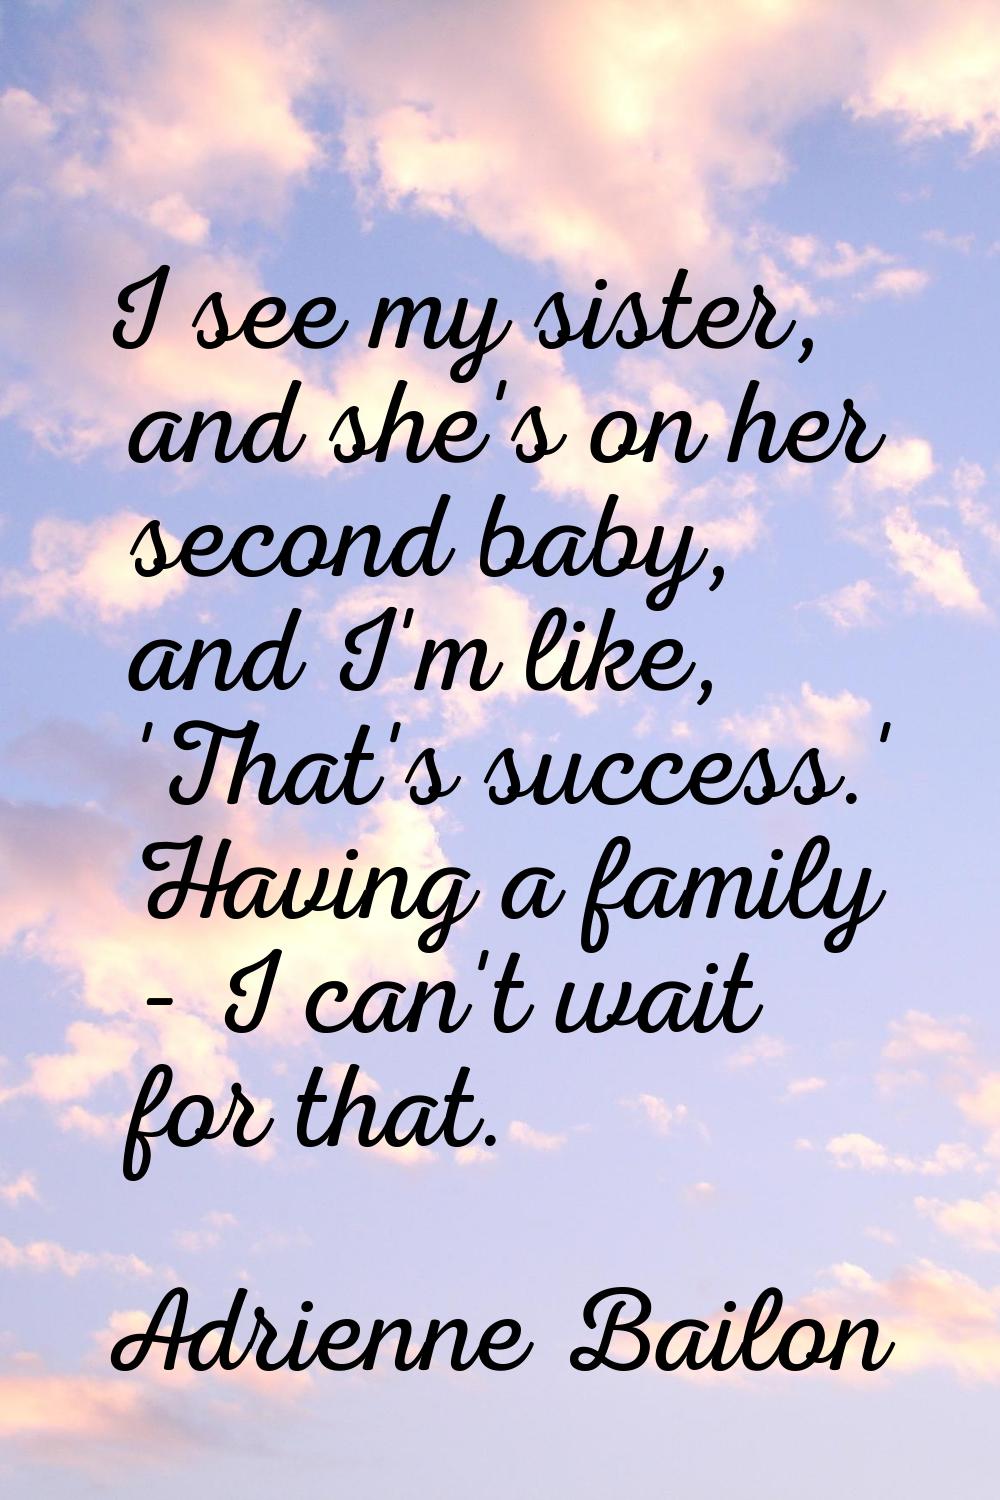 I see my sister, and she's on her second baby, and I'm like, 'That's success.' Having a family - I 